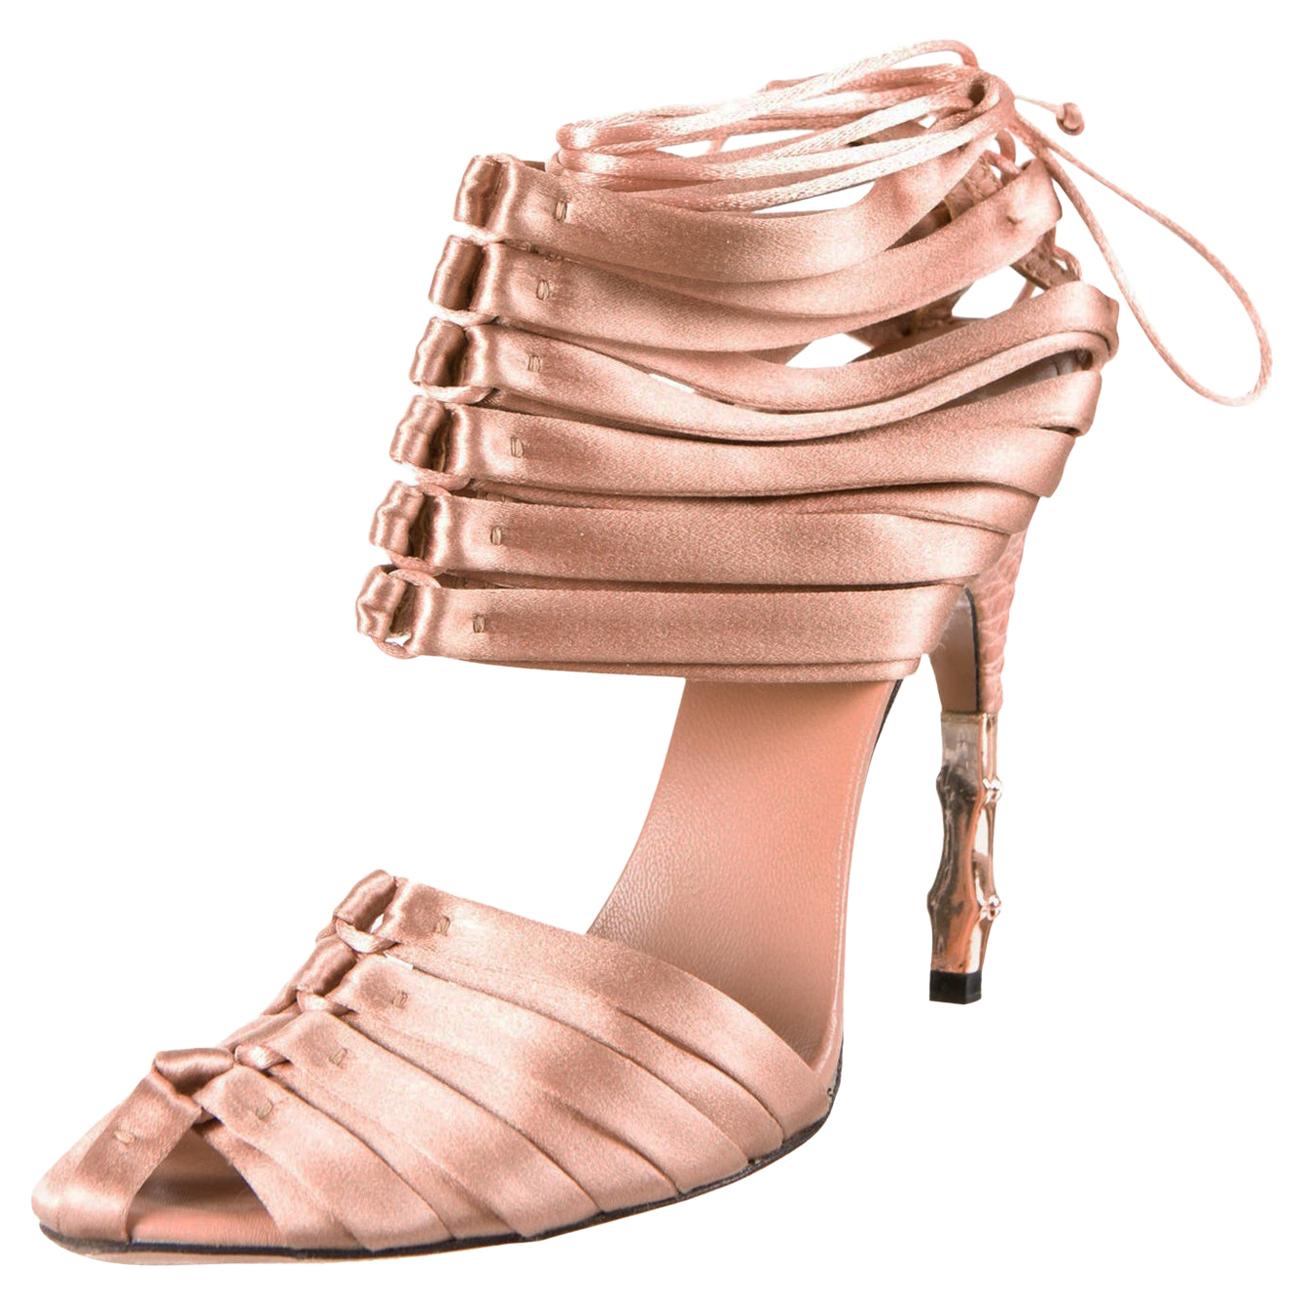 New TOM FORD for GUCCI S/S 2004 Nude Crocodile Satin Corset Shoes 9 - It.  39 at 1stDibs | gucci corset heels